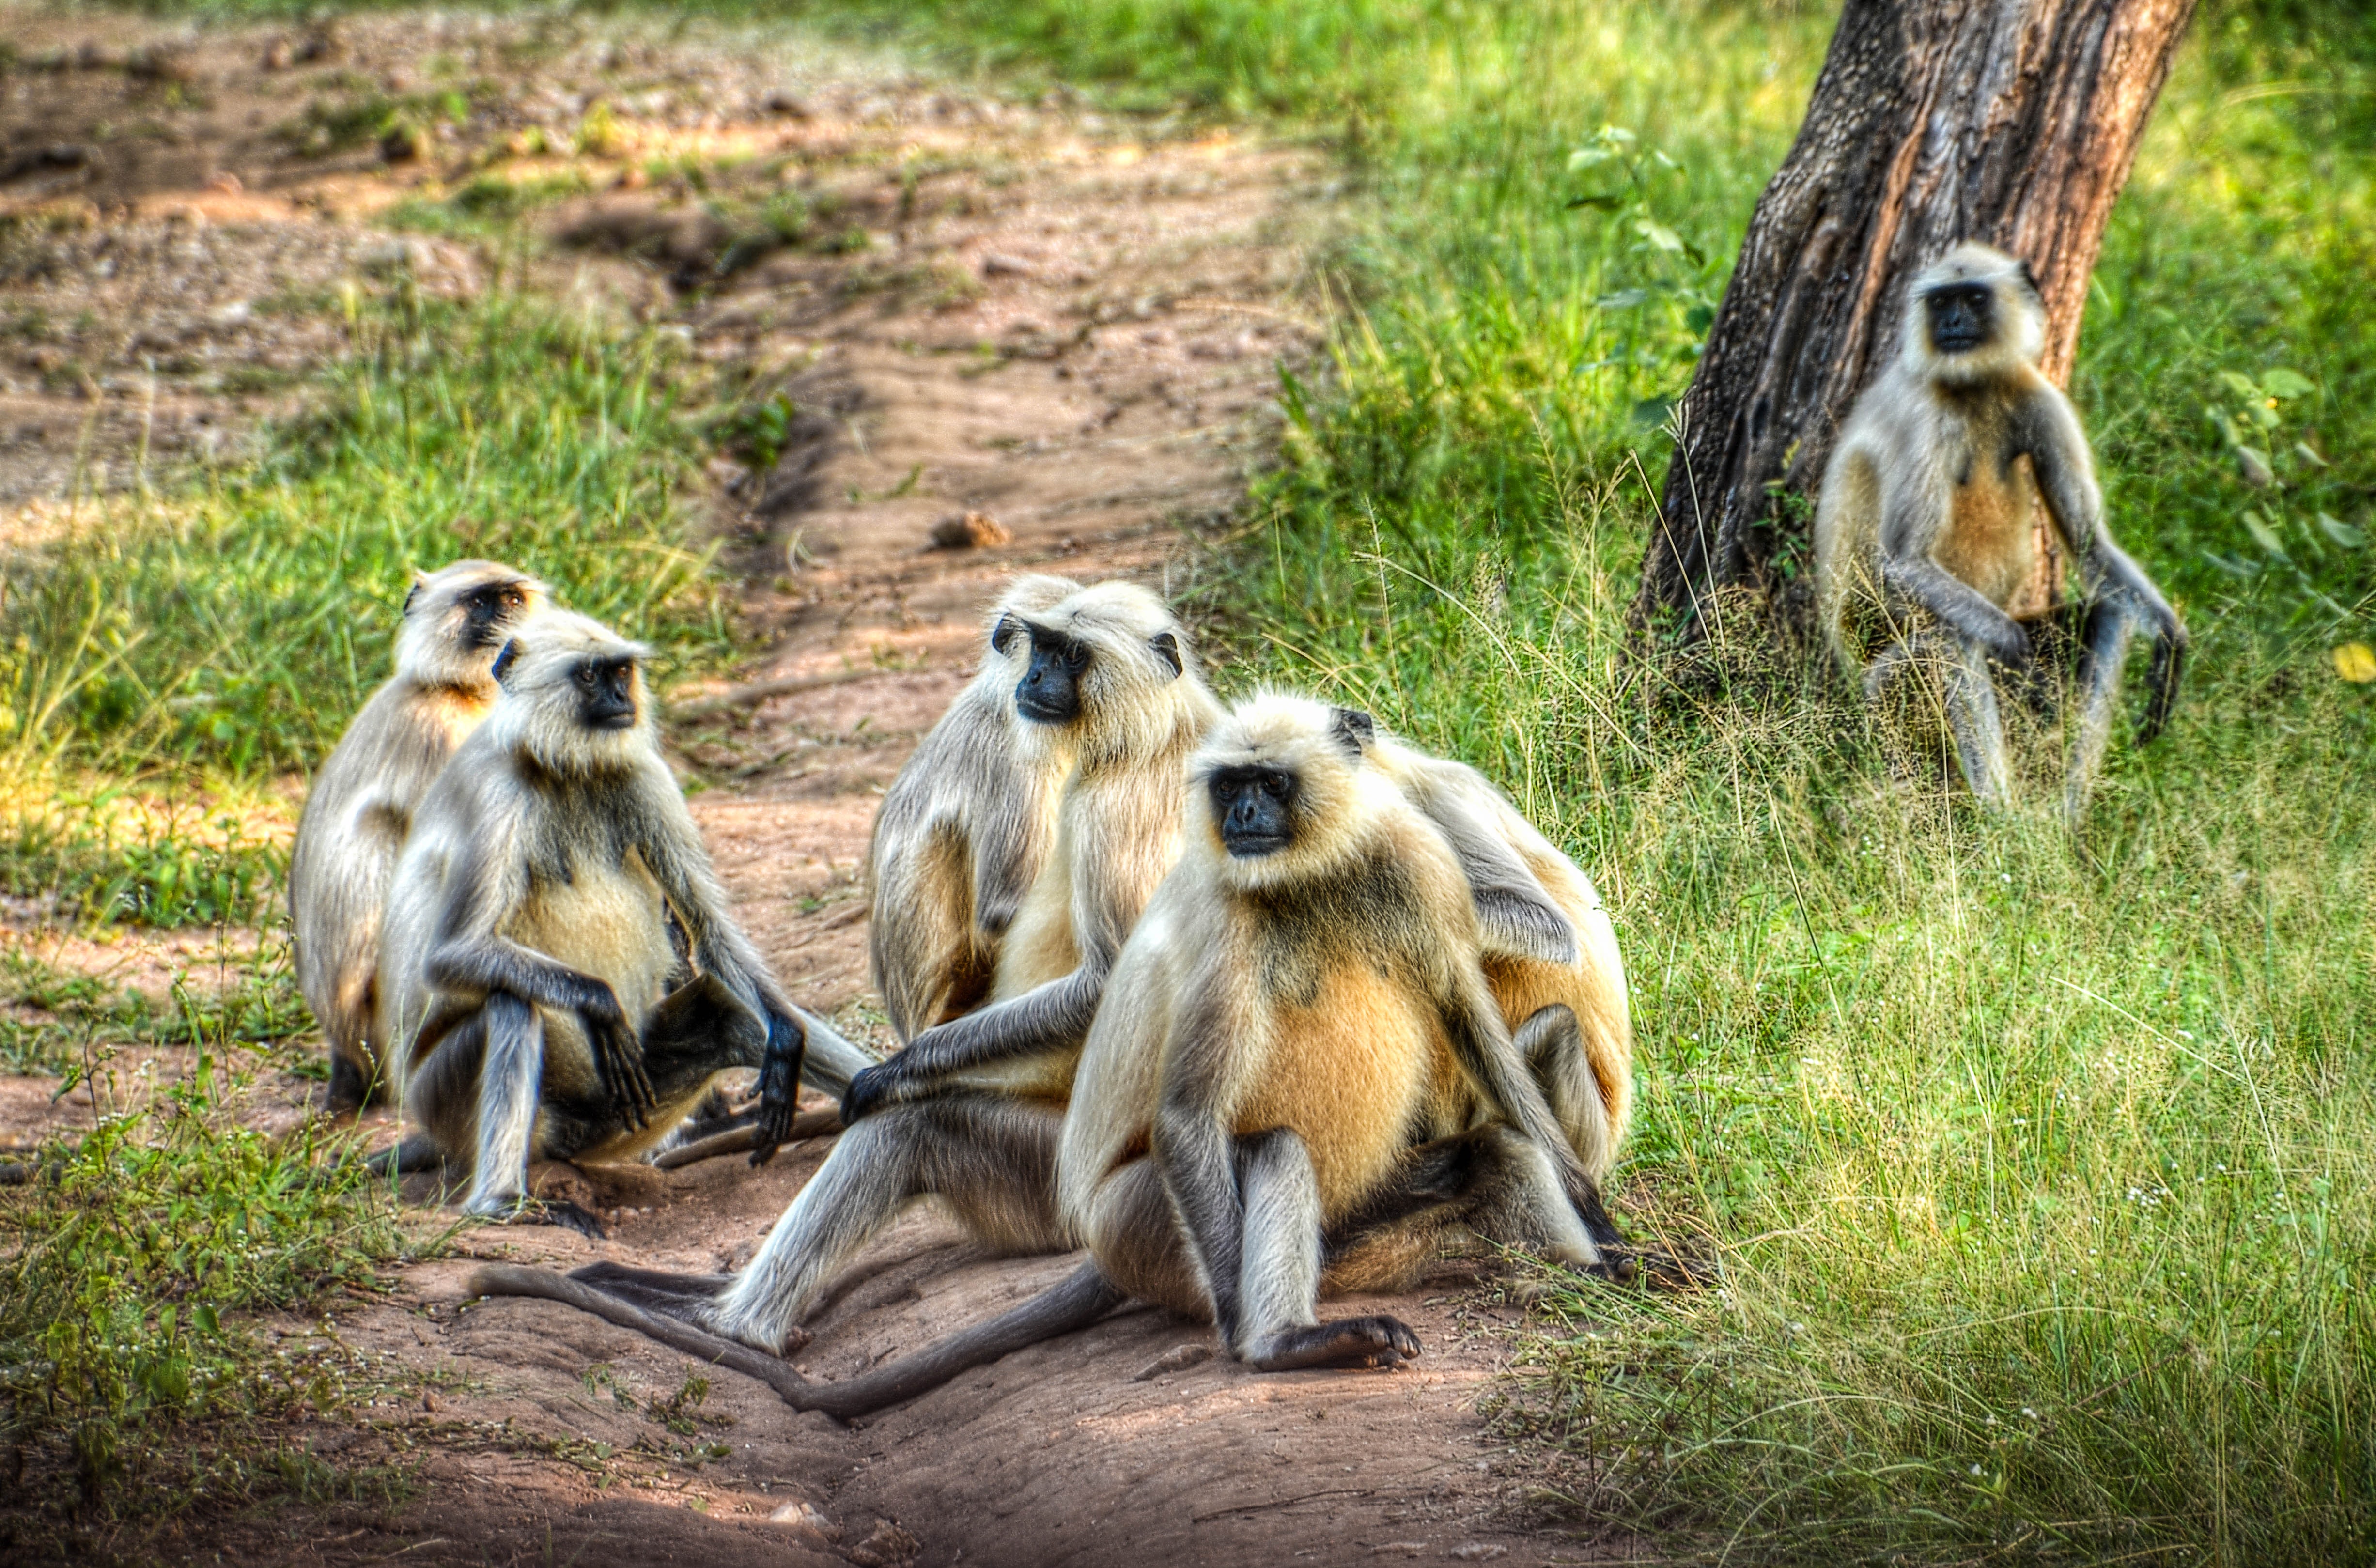 Group of Primates on Ground, Animal photography, Photography, Wildlife, Wilderness, HQ Photo